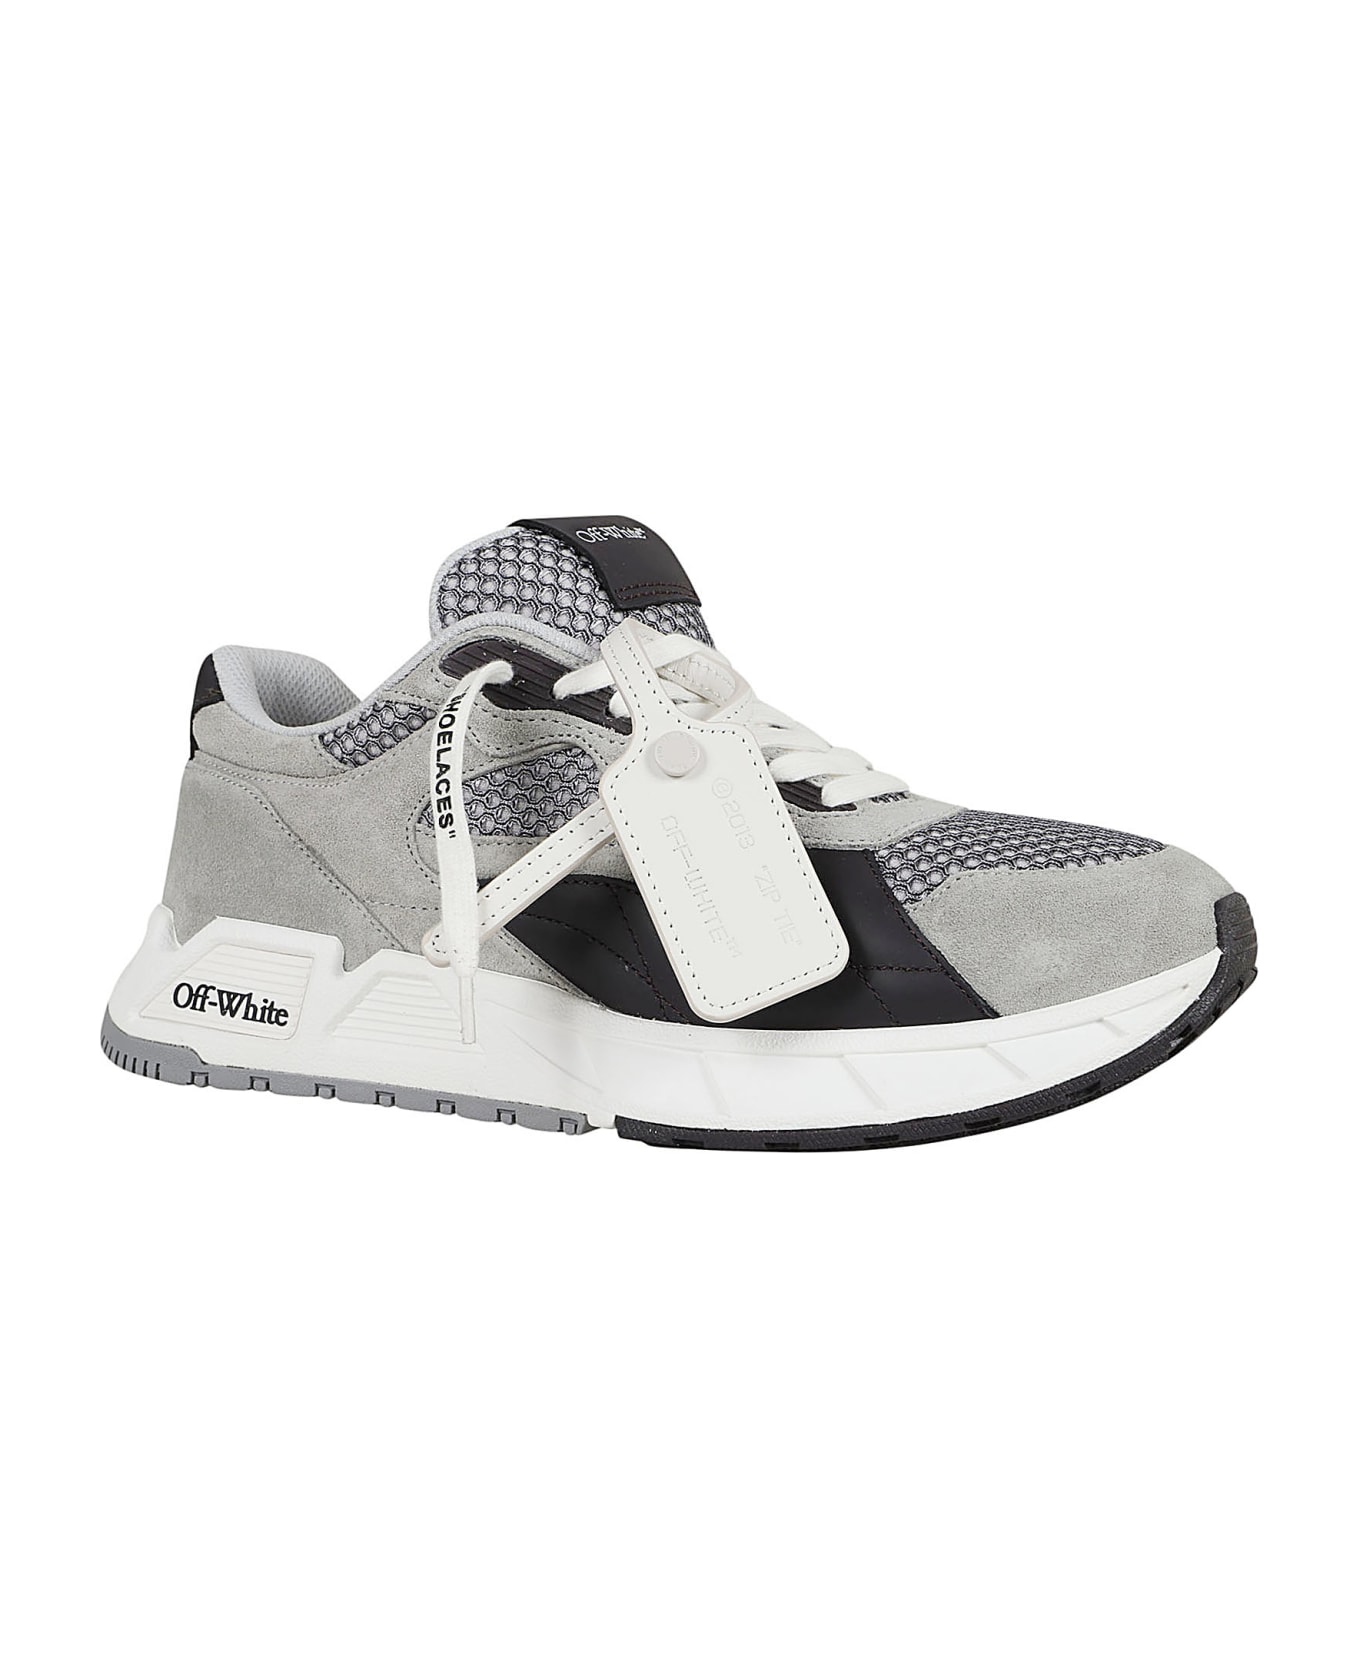 Off-White Kick Off Sneakers - Grey Anthracite スニーカー